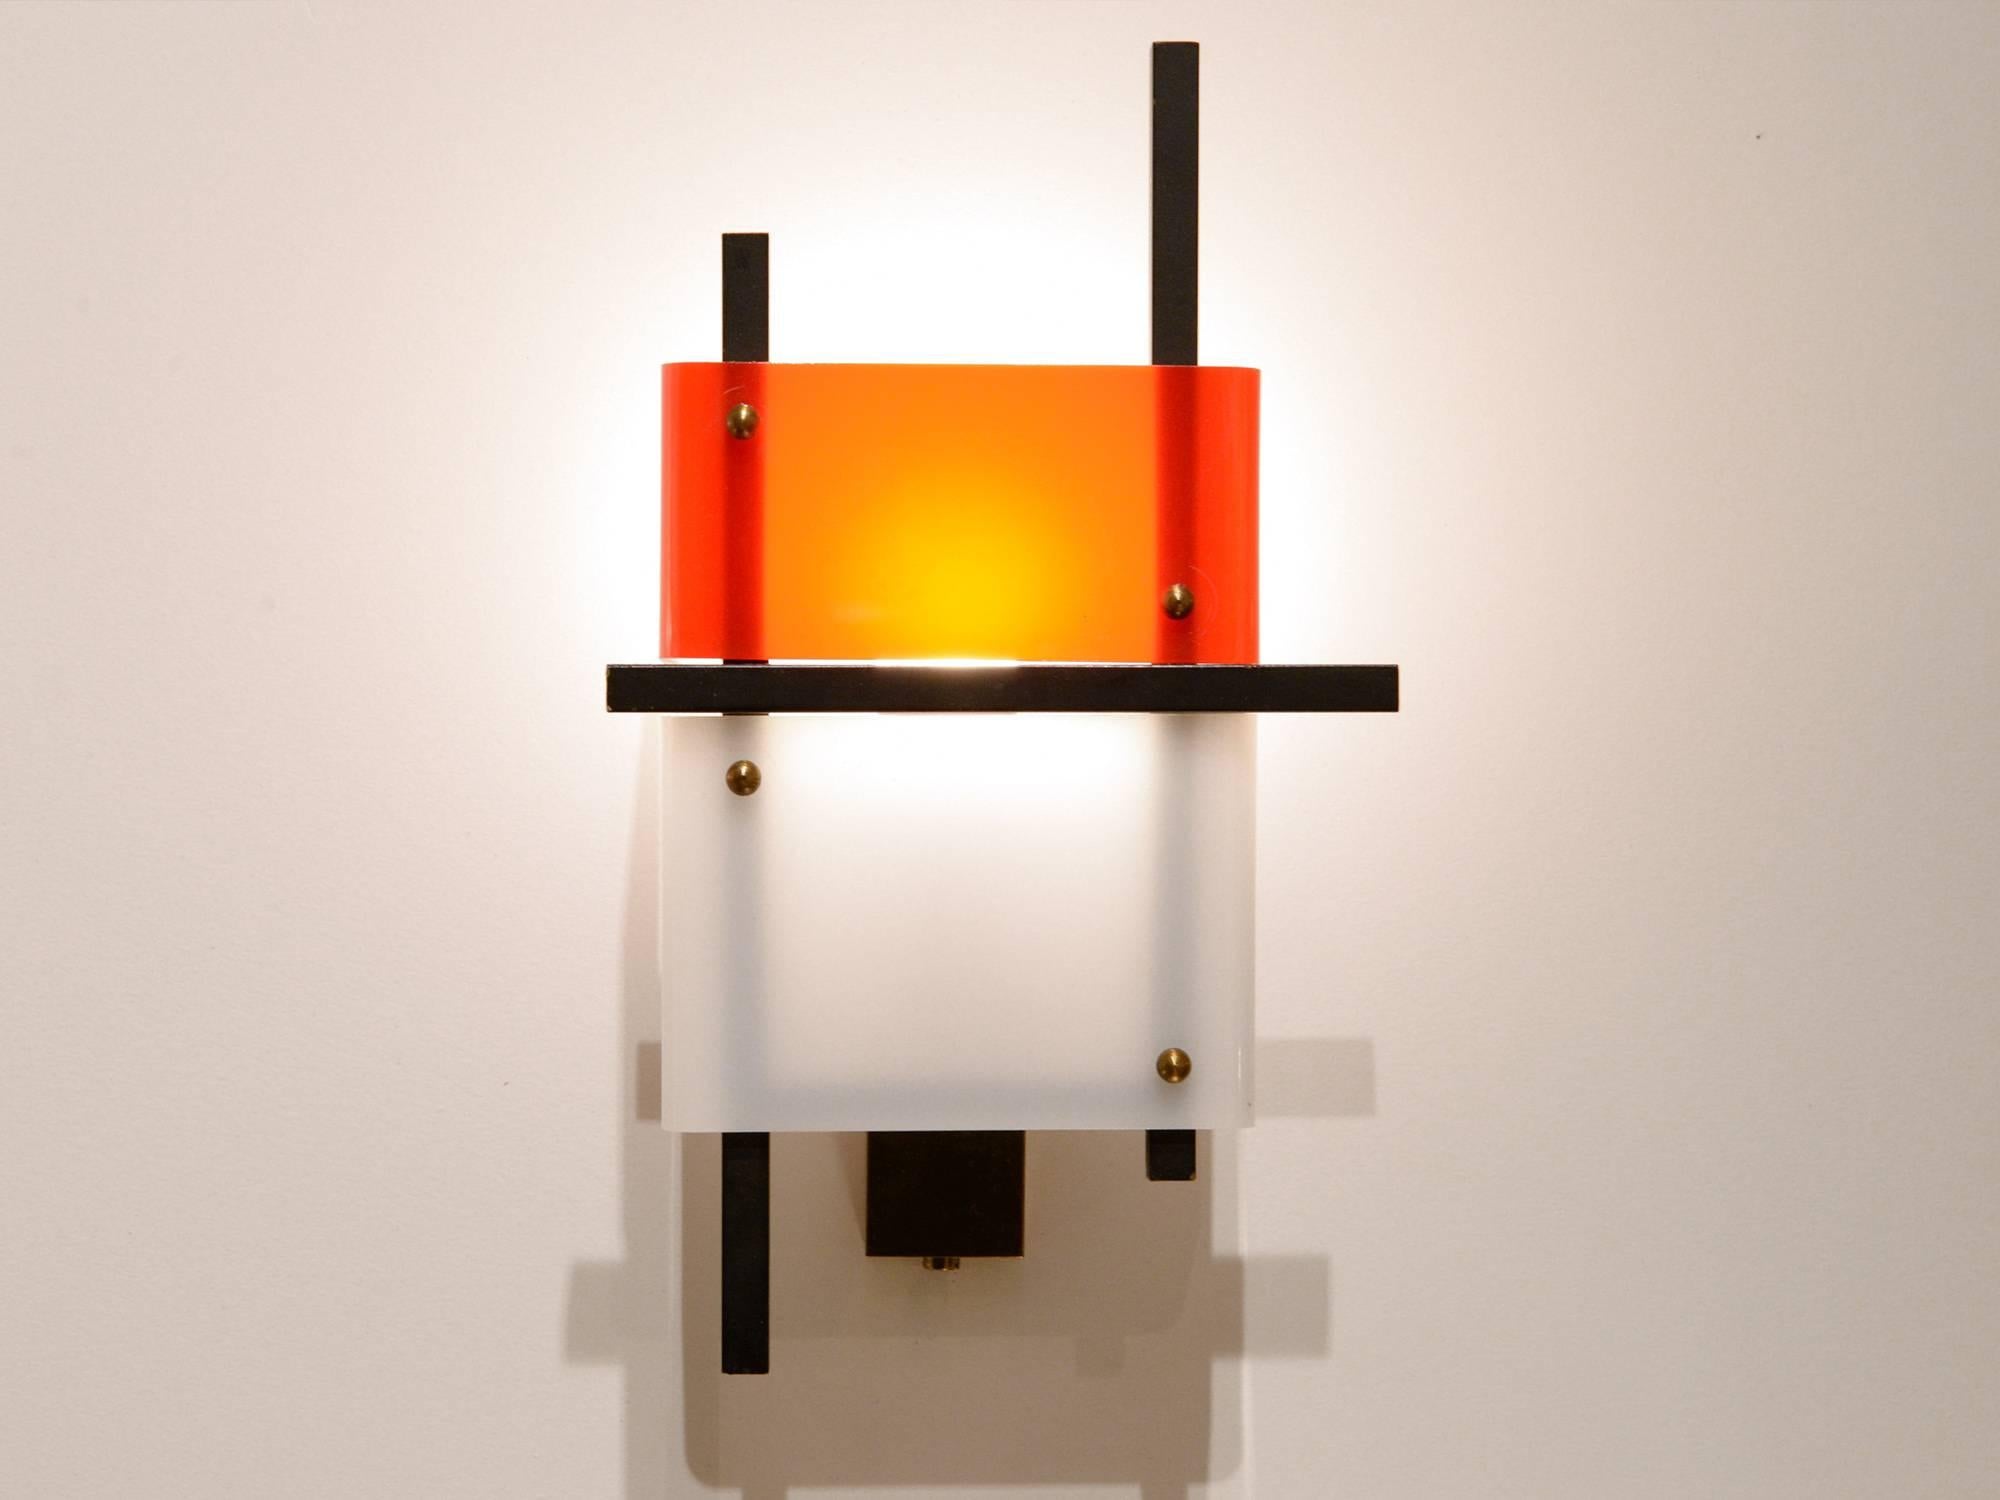 Stilnovo
Pair of wall lights
Red and white plexiglass, black lacquered metal
Italy, circa 1950
Measures: H 23 x W 13 x D 9 cm.